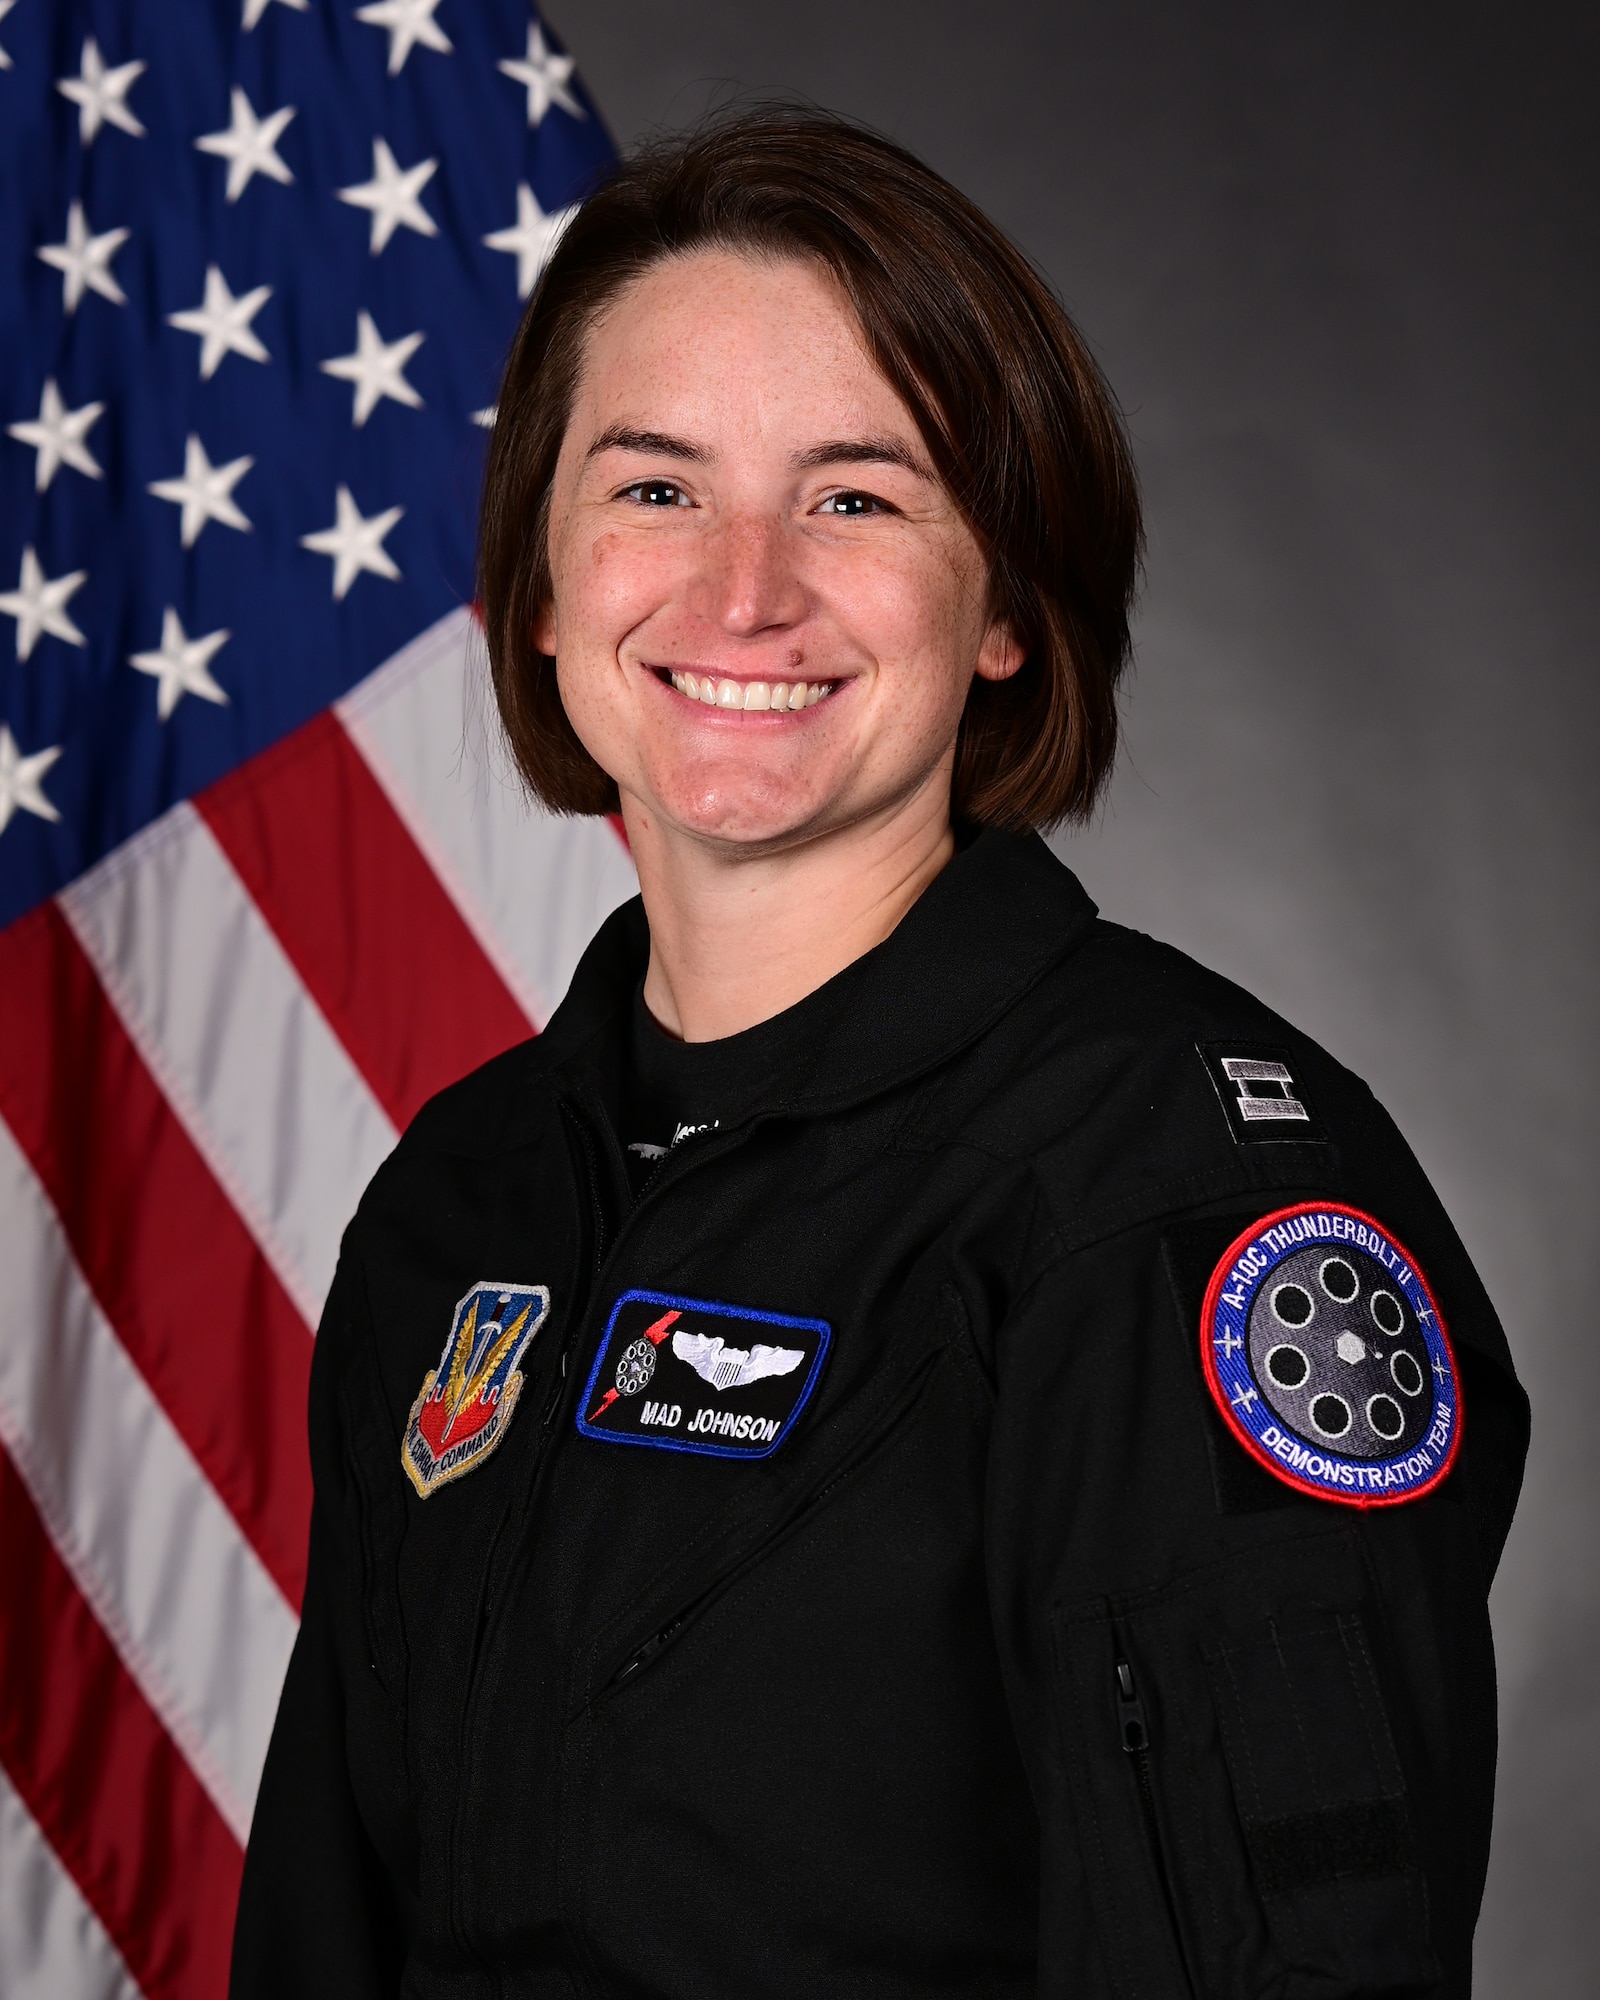 The official photo of Captain Lindsay "MAD" Johnson.